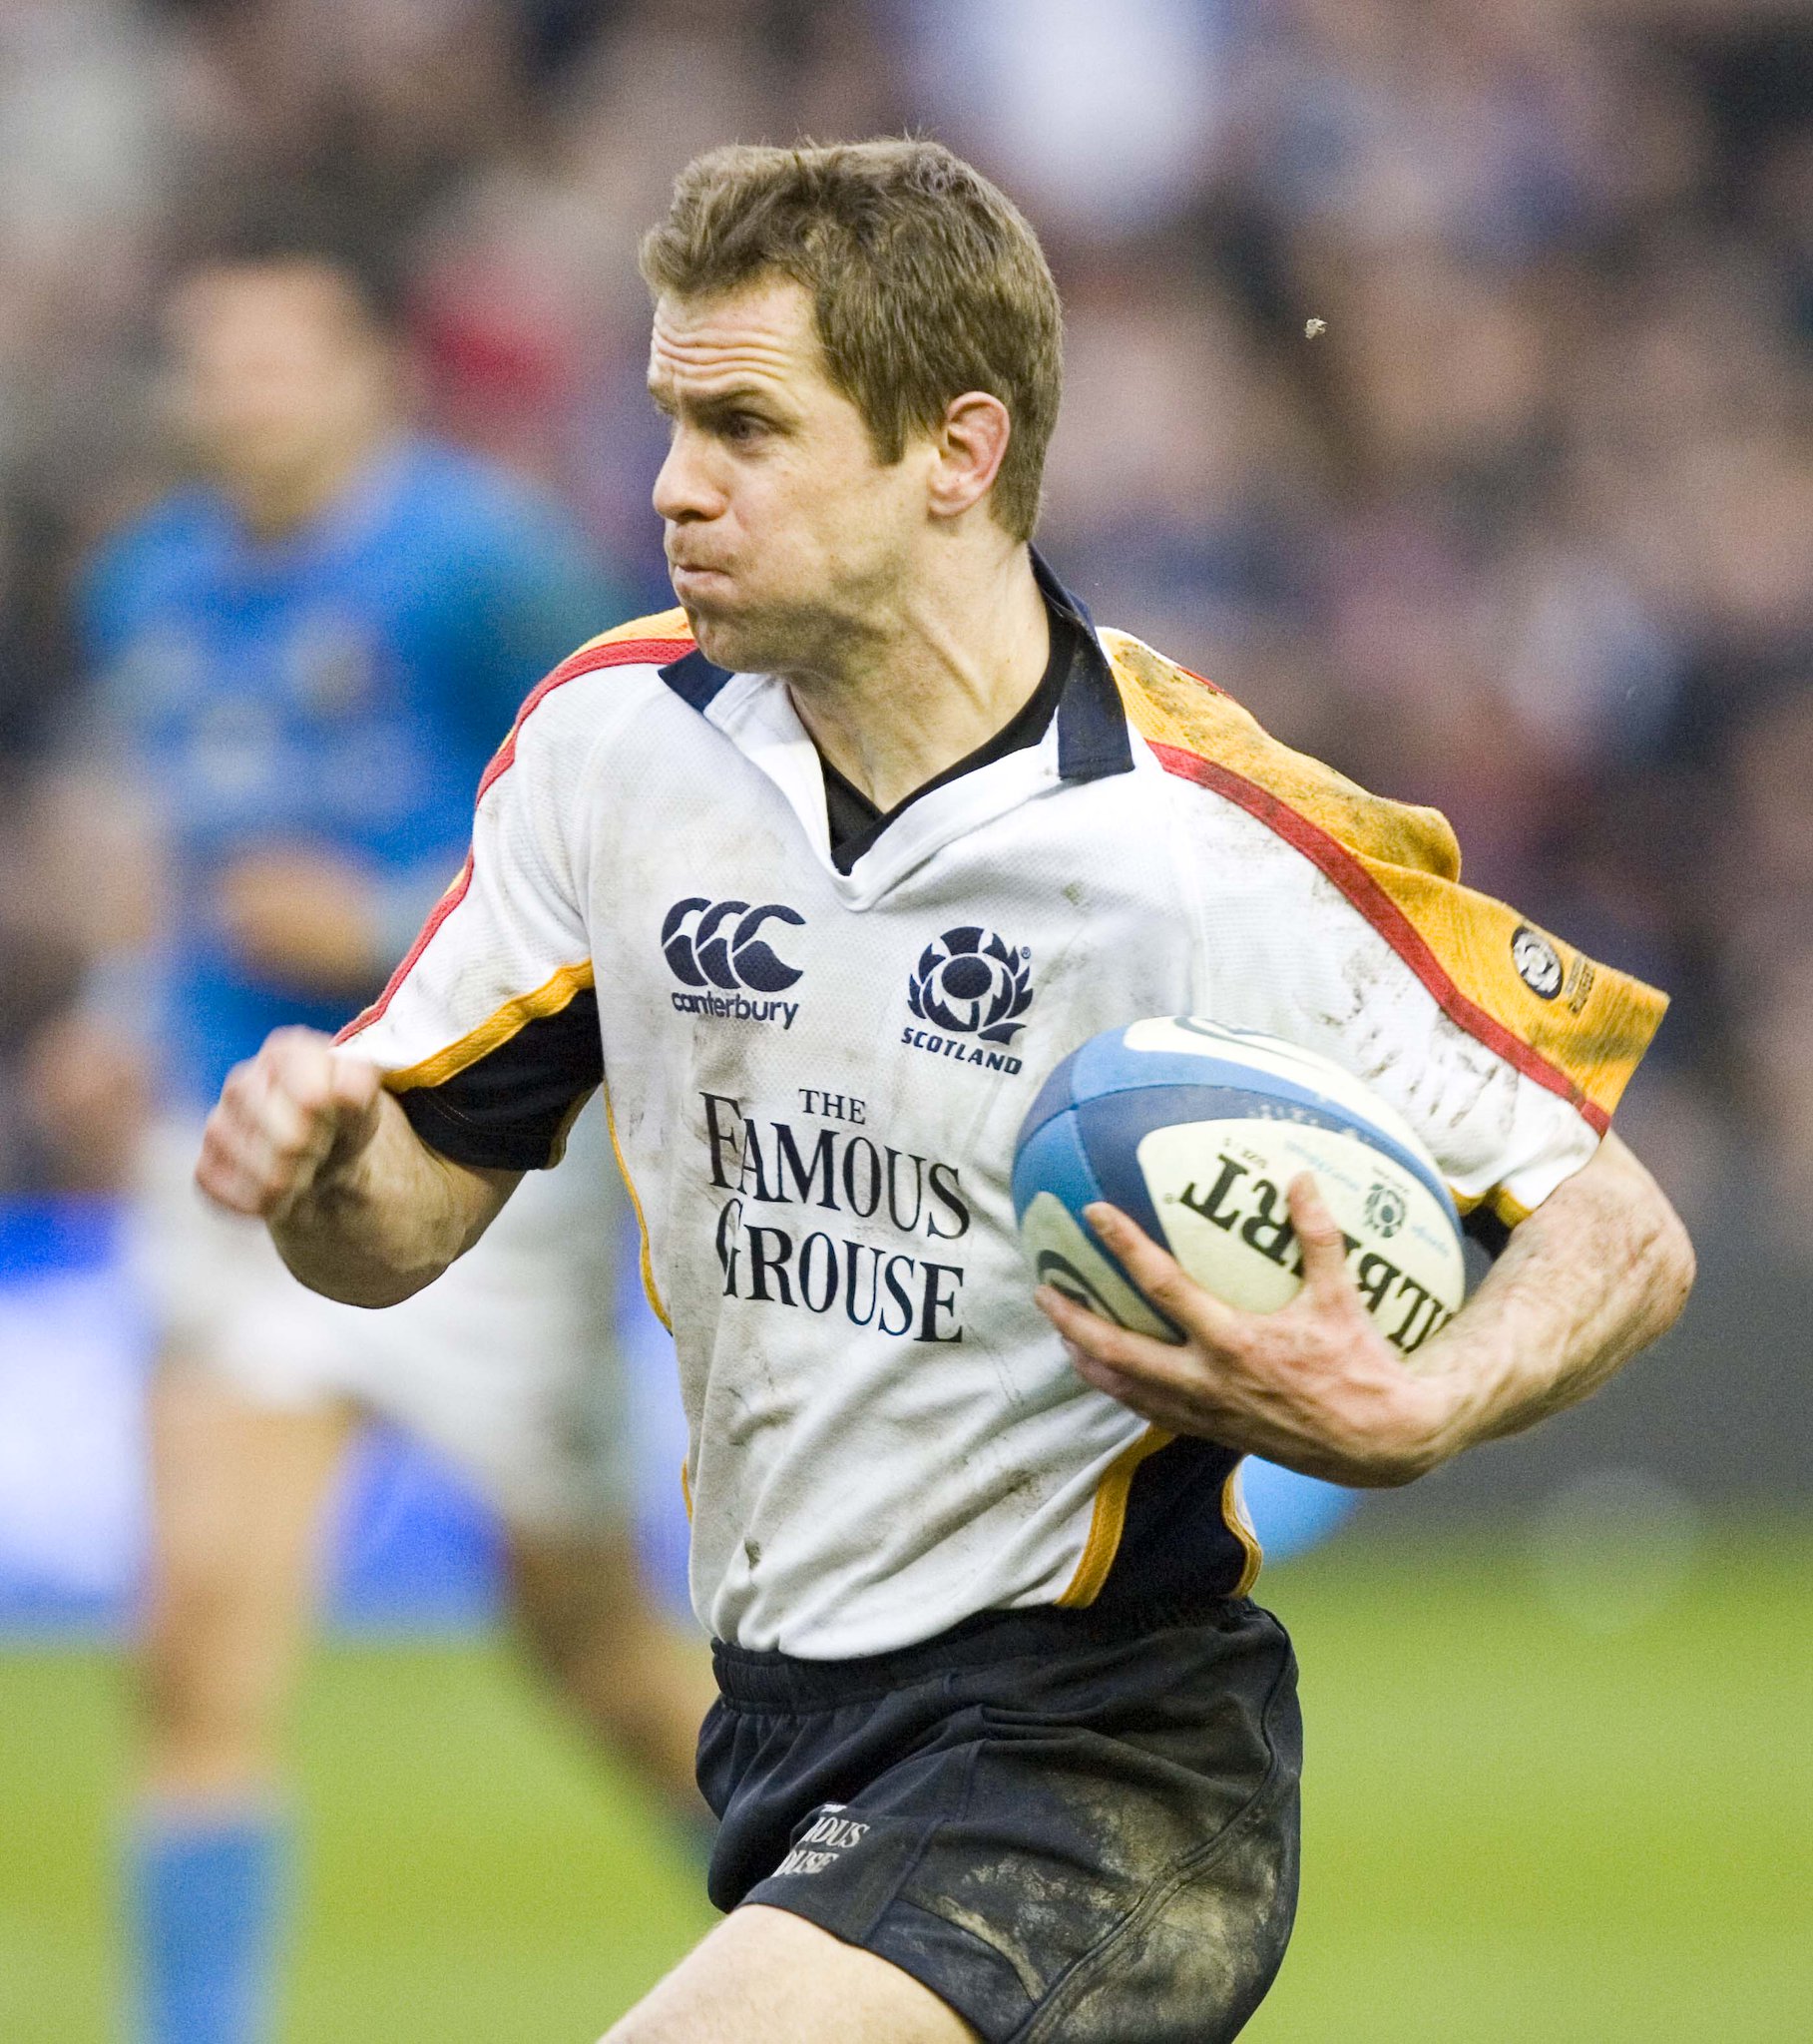 109 caps. 809 points. One Scottish Rugby legend.

Happy Birthday, Chris Paterson  